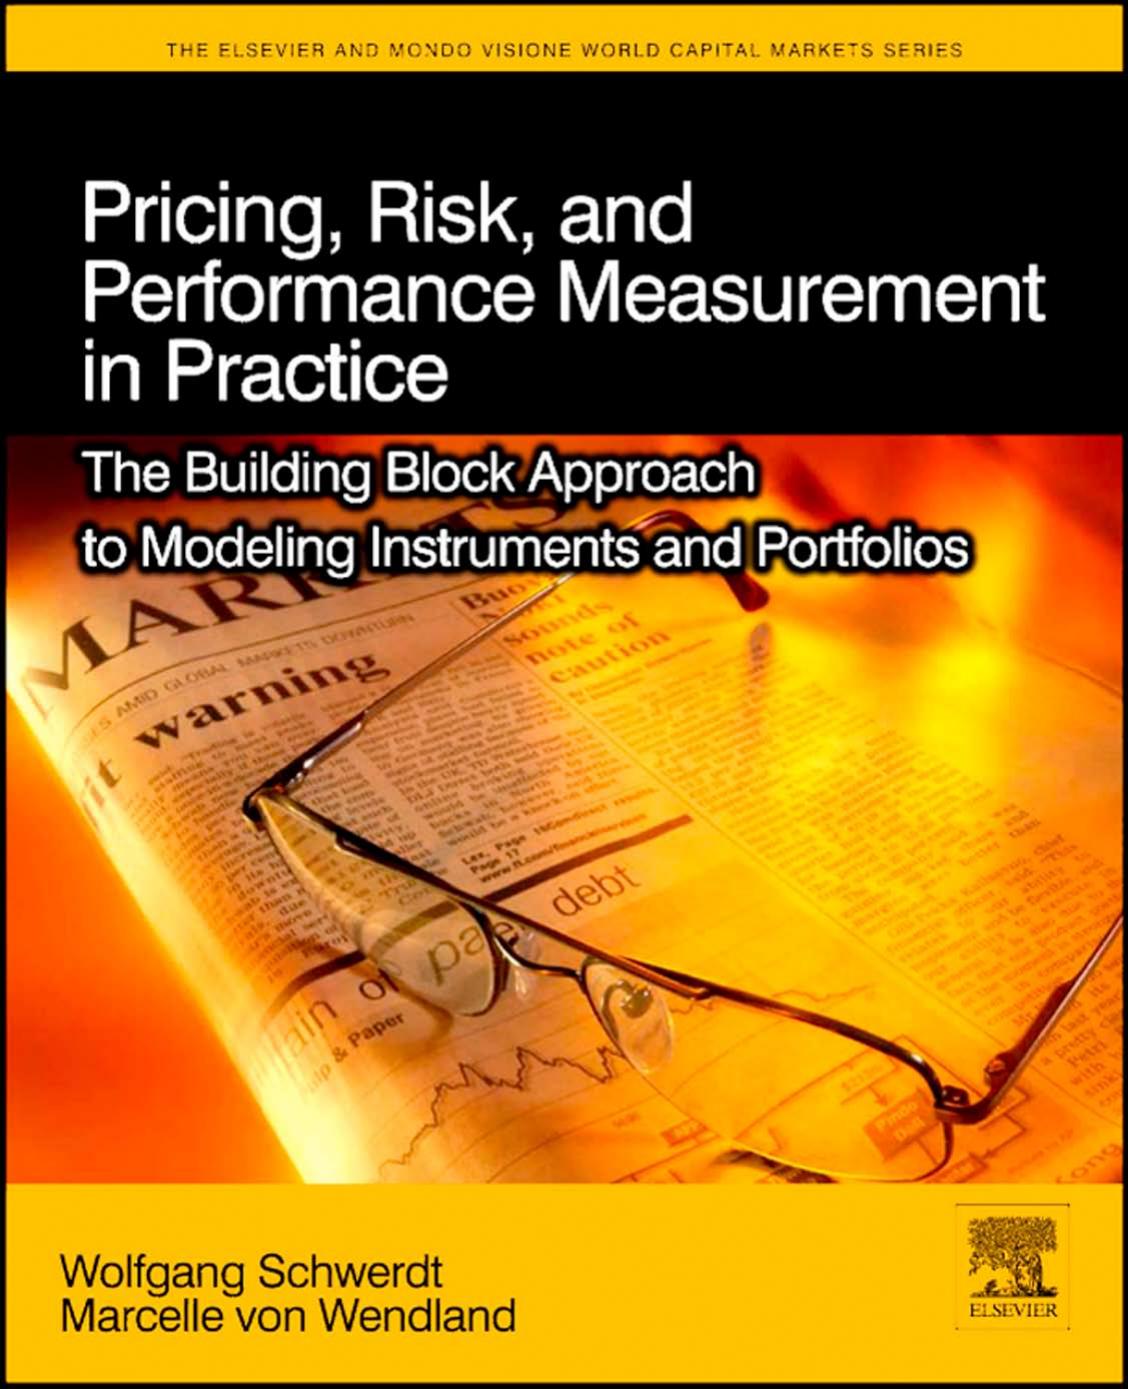 Pricing  Risk  and Performance Measurement in Practice  The Building Block Approach to Modeling Instruments and Portfolios 2010